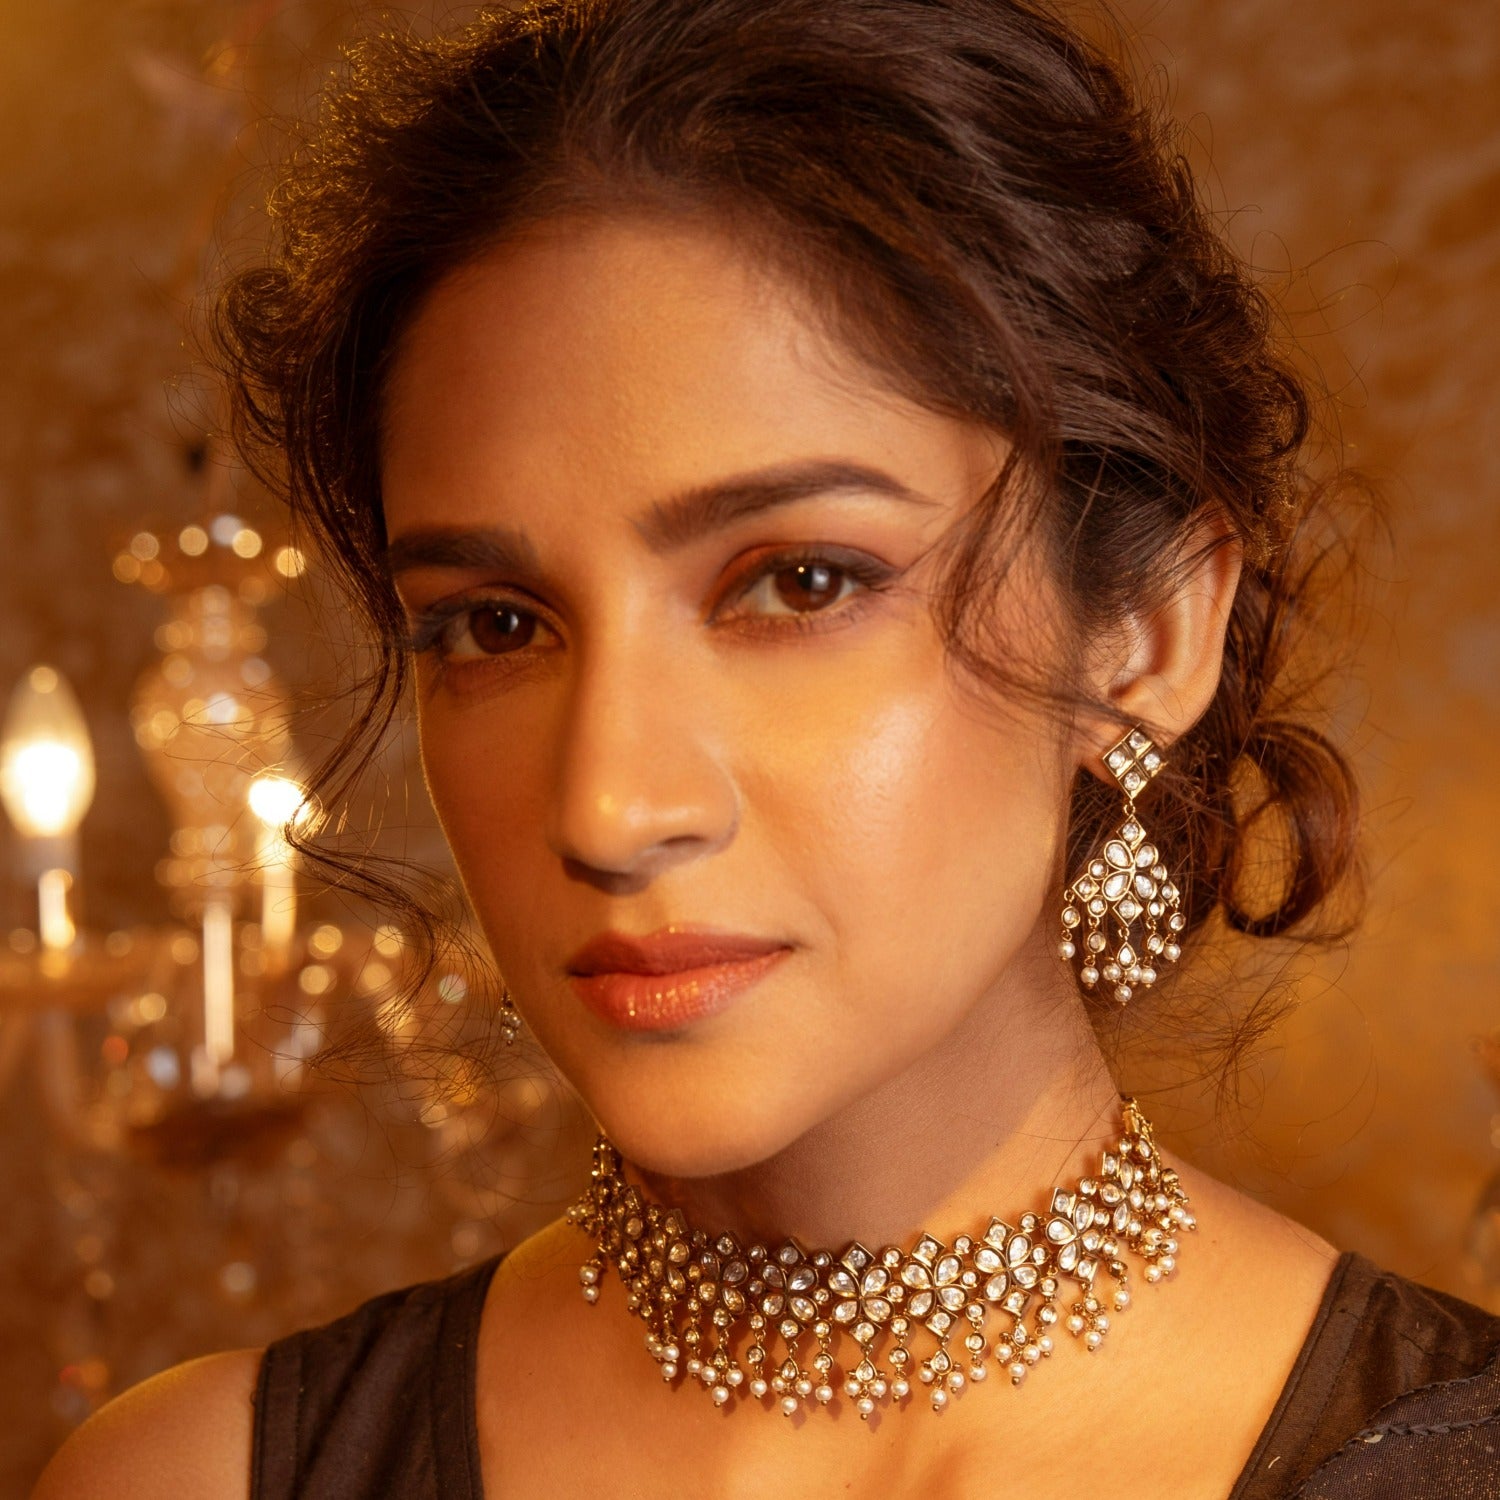 A picture of an Indian artificial jewelry set with a gold-toned choker necklace and matching earrings with Cubic Zirconia stones.